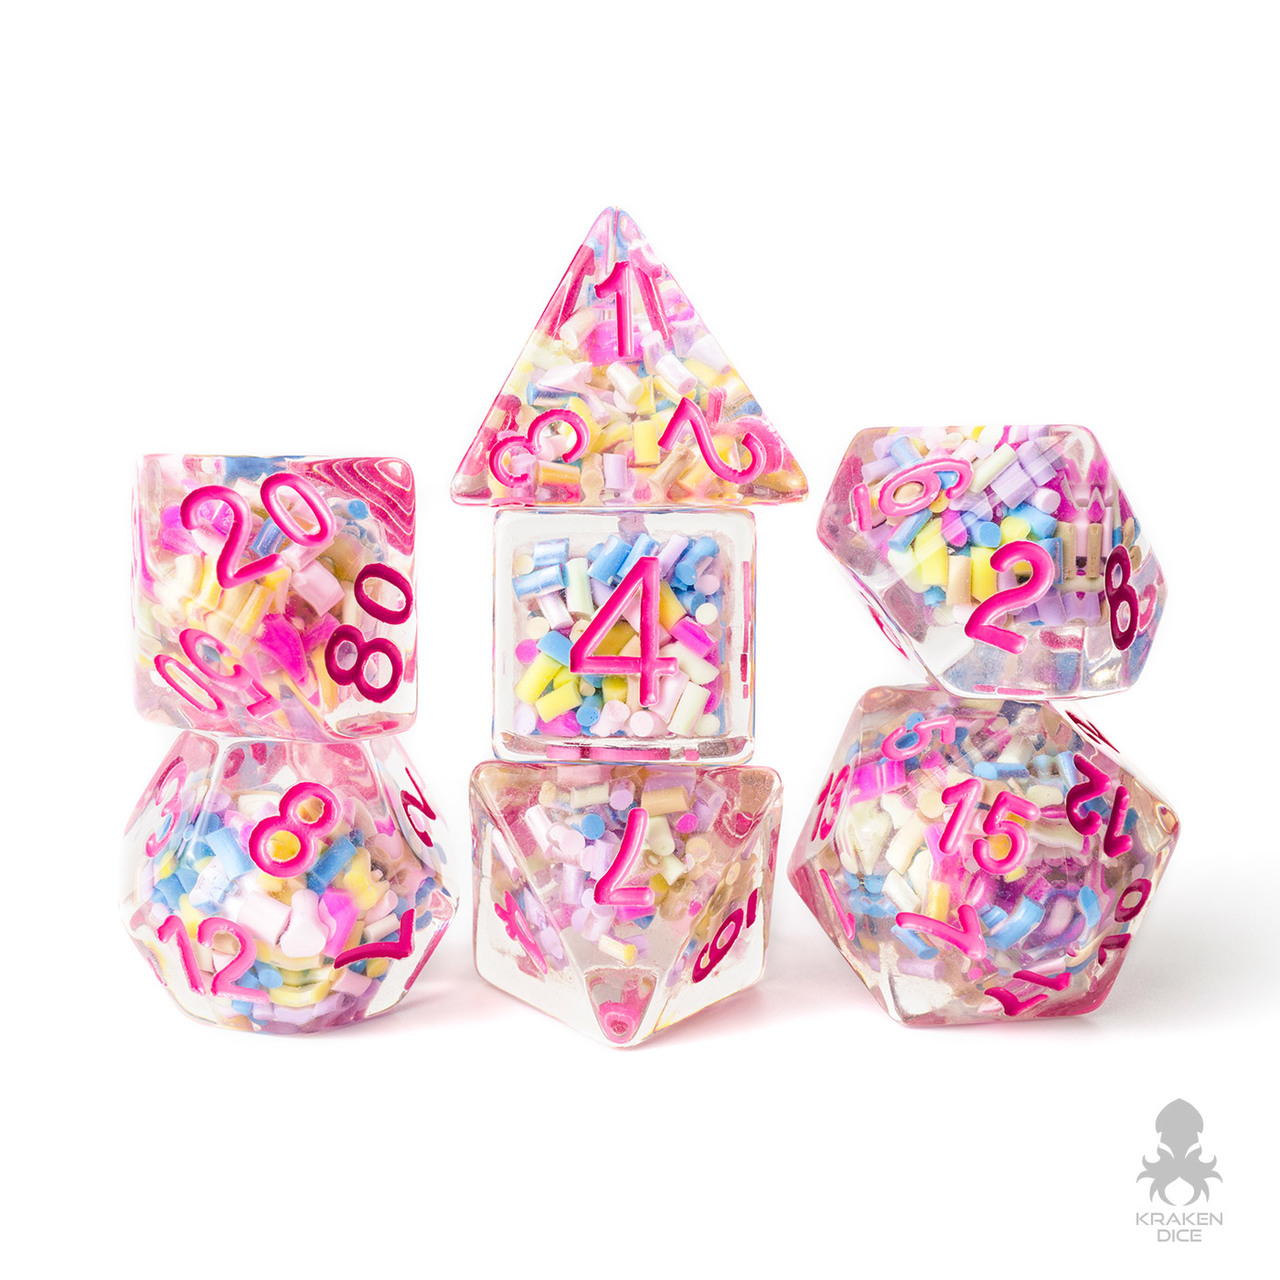 DND dice that have sprinkles in them